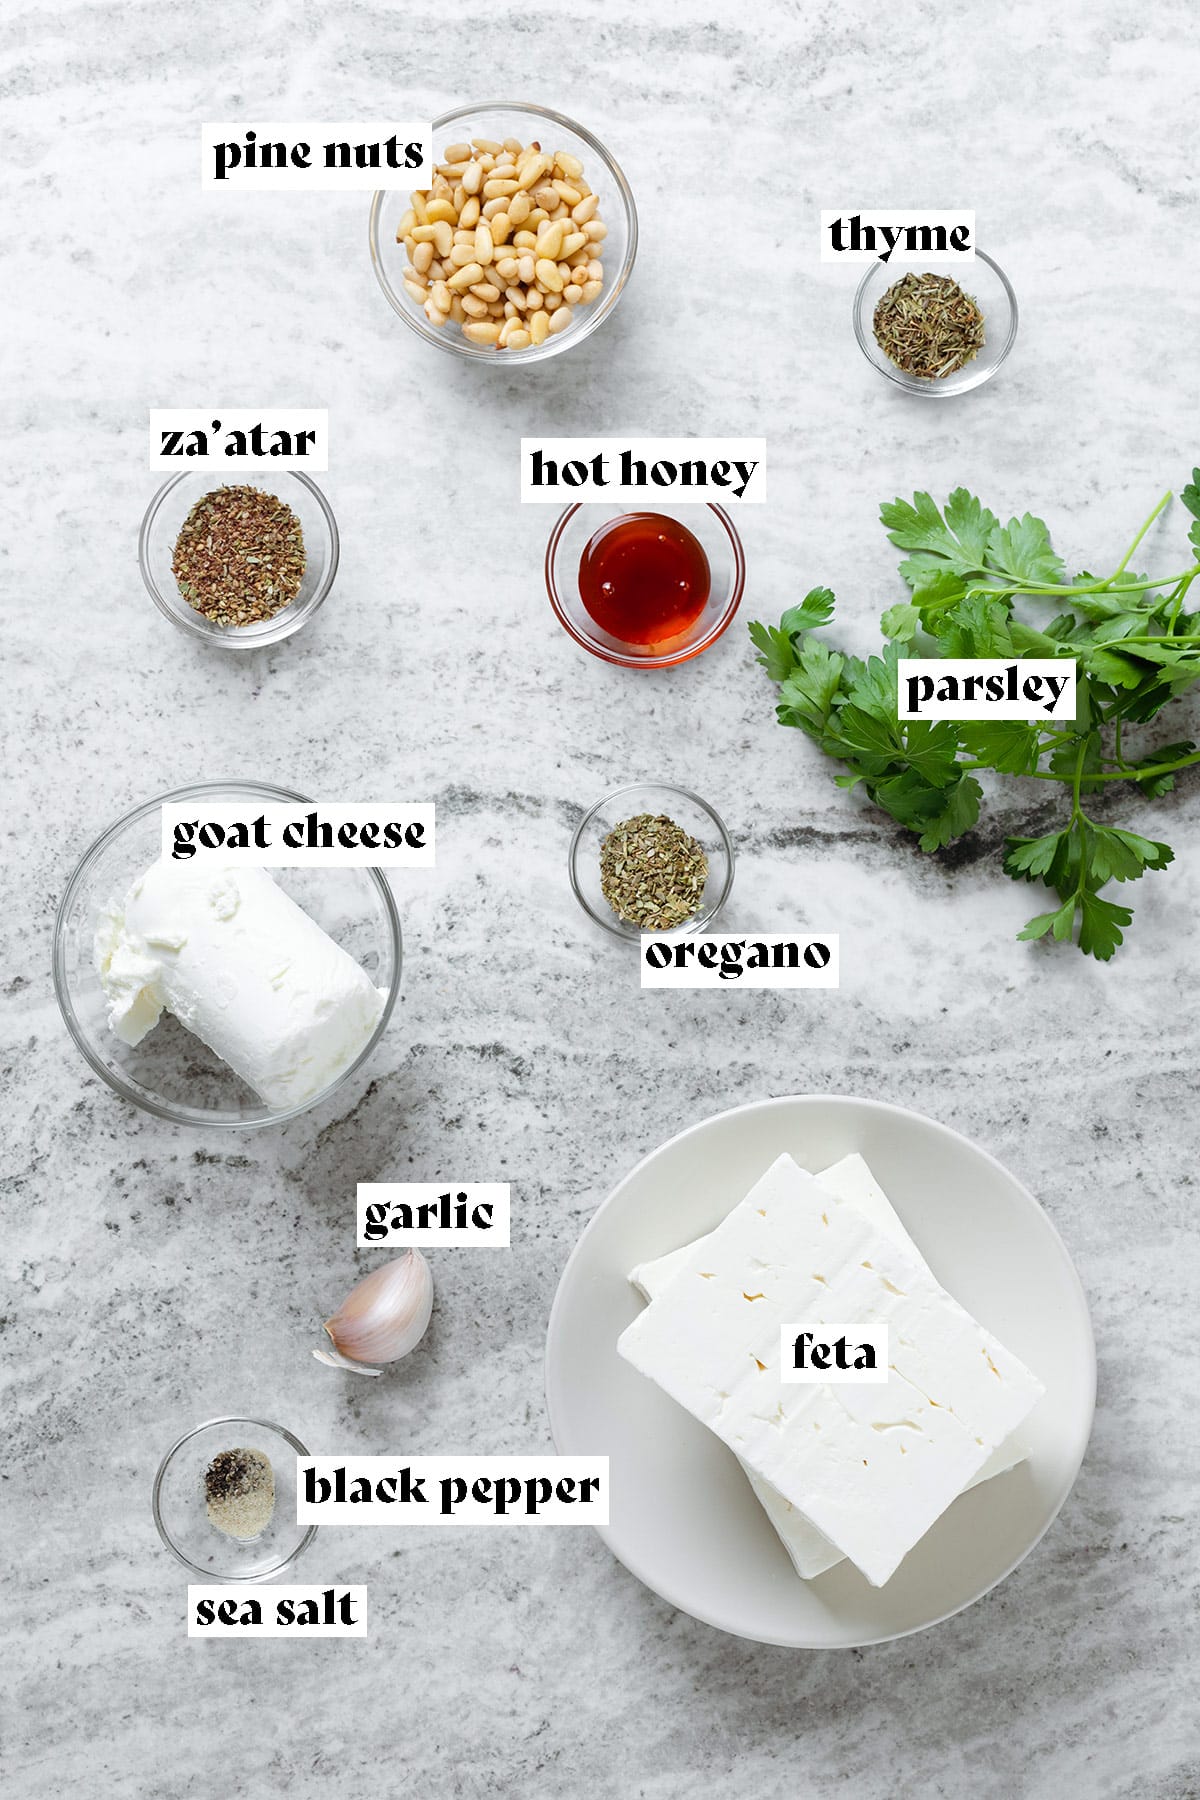 Feta, goat cheese, hot honey, and other ingredients for a dip laid out on a stone background.